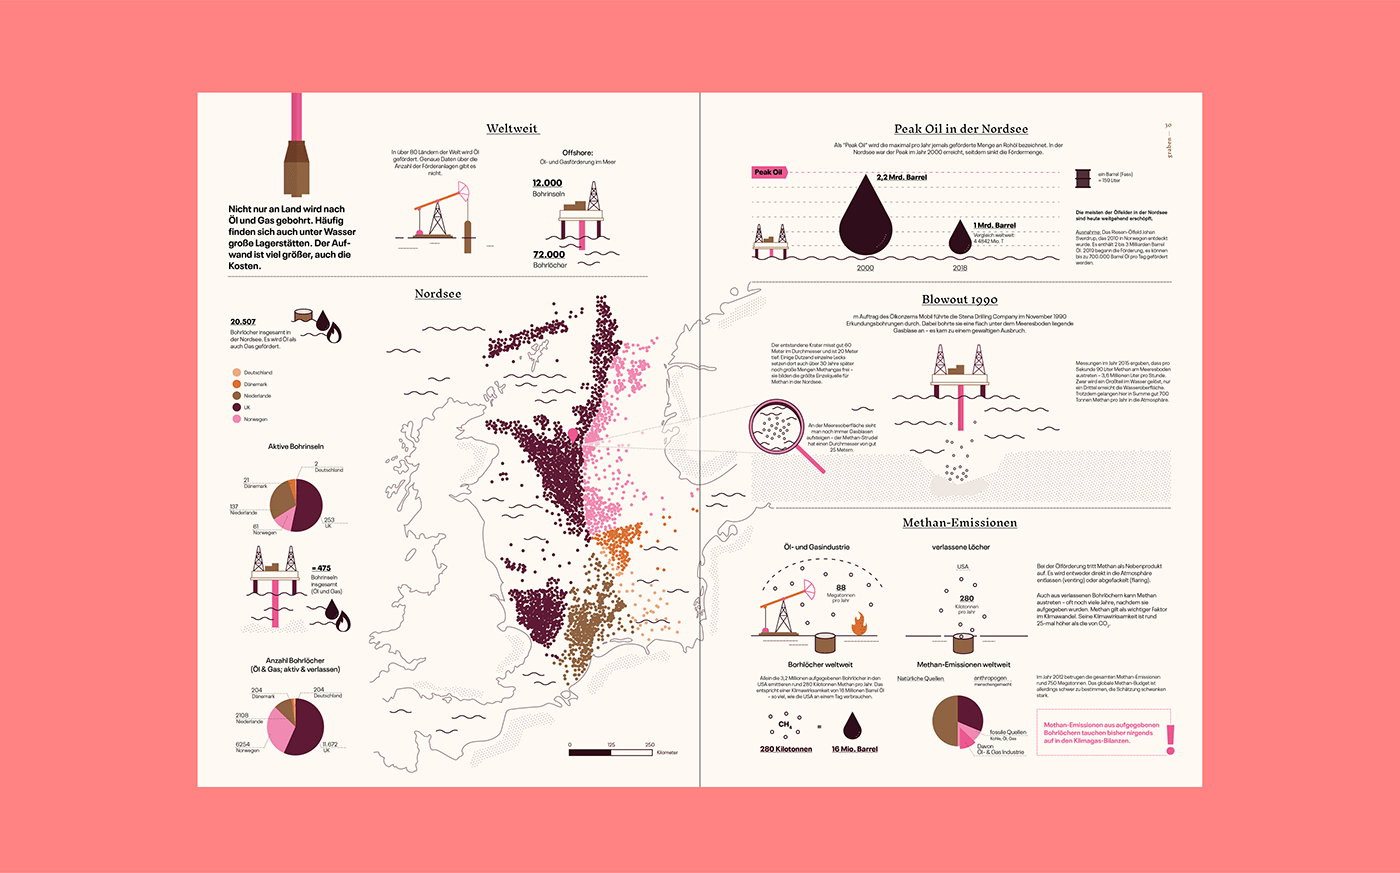 Infographics showing all oil wells in the Baltic Sea and the Peak Oil moment in the Baltic Sea